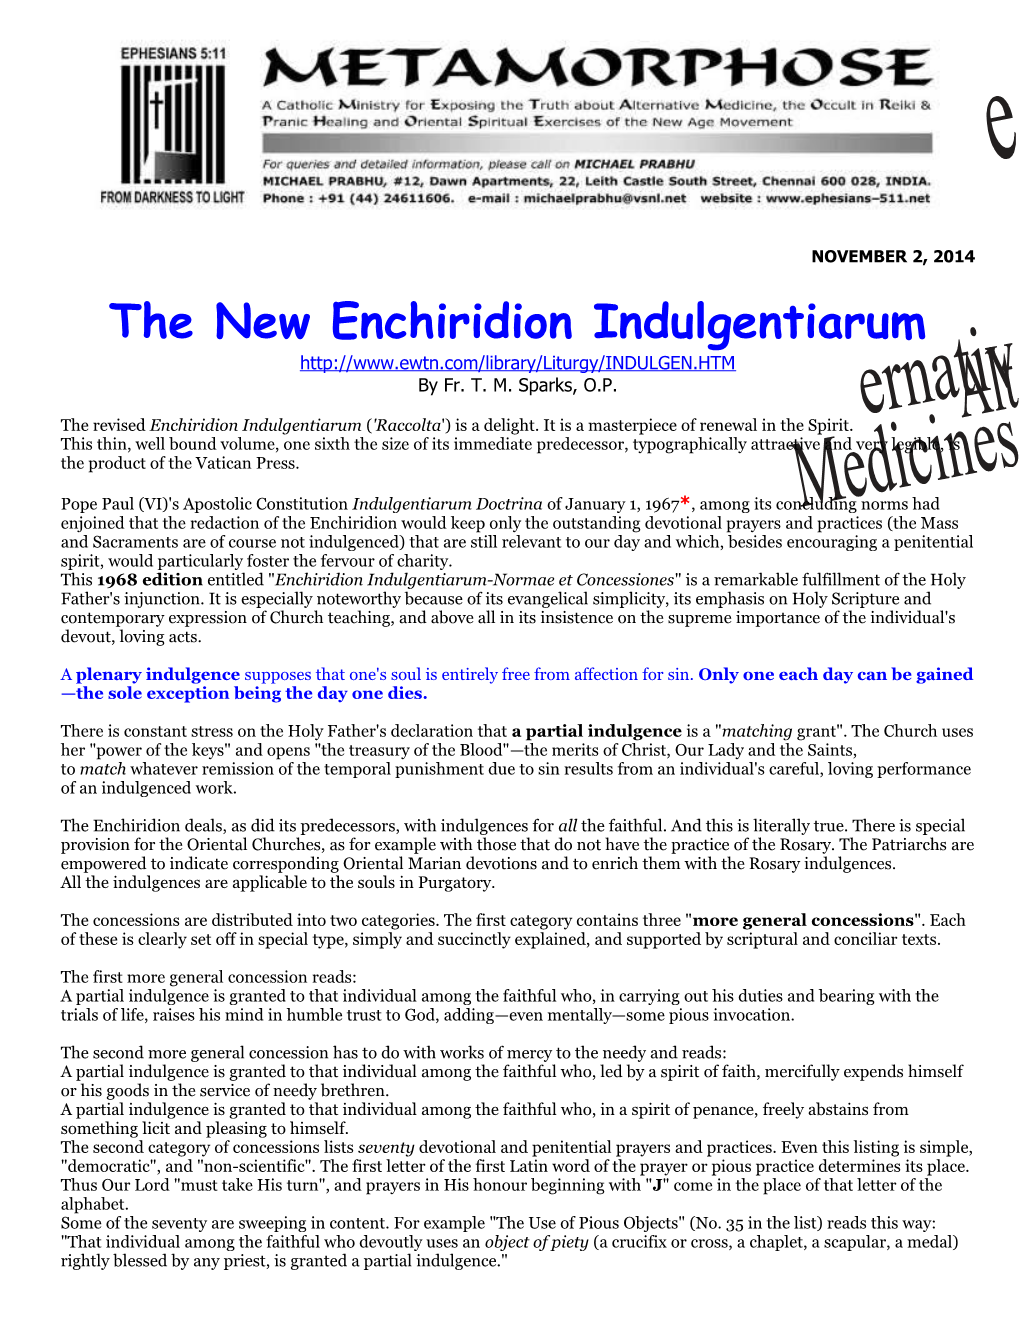 The Revised Enchiridion Indulgentiarum('Raccolta ') Is a Delight. It Is a Masterpiece Of